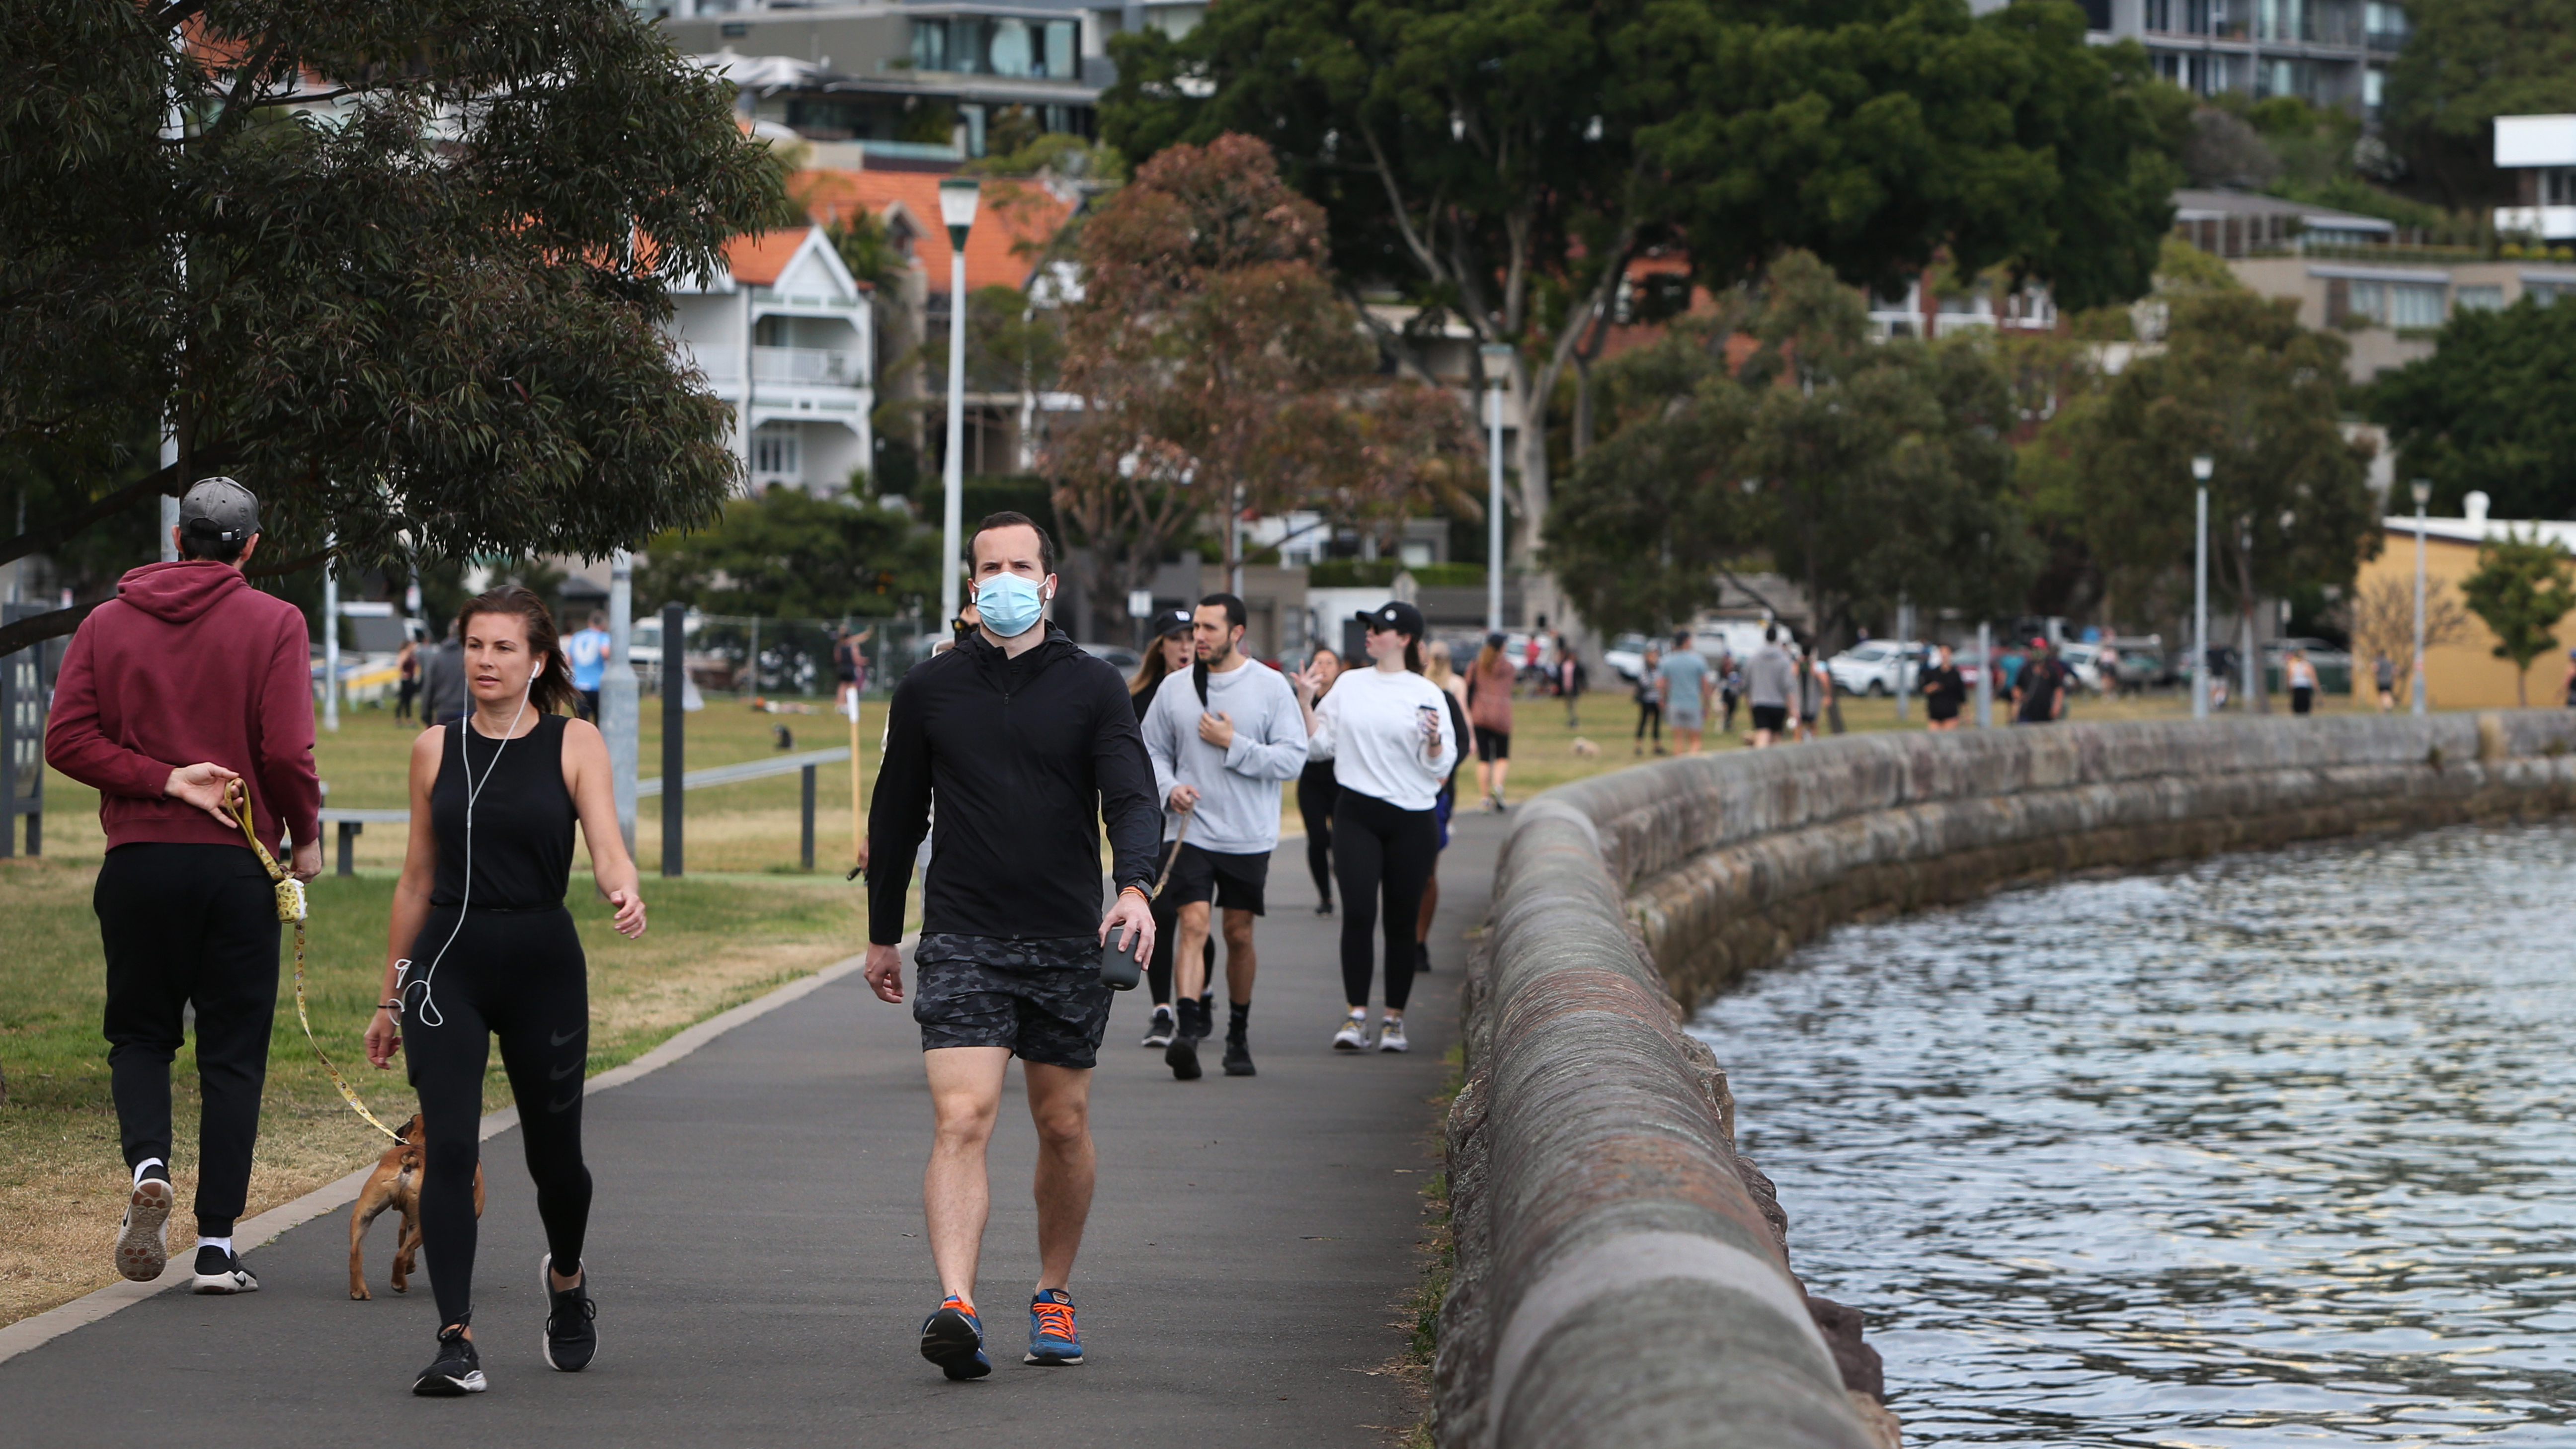 People exercising in the early morning at Rushcutters Bay  in Sydney.